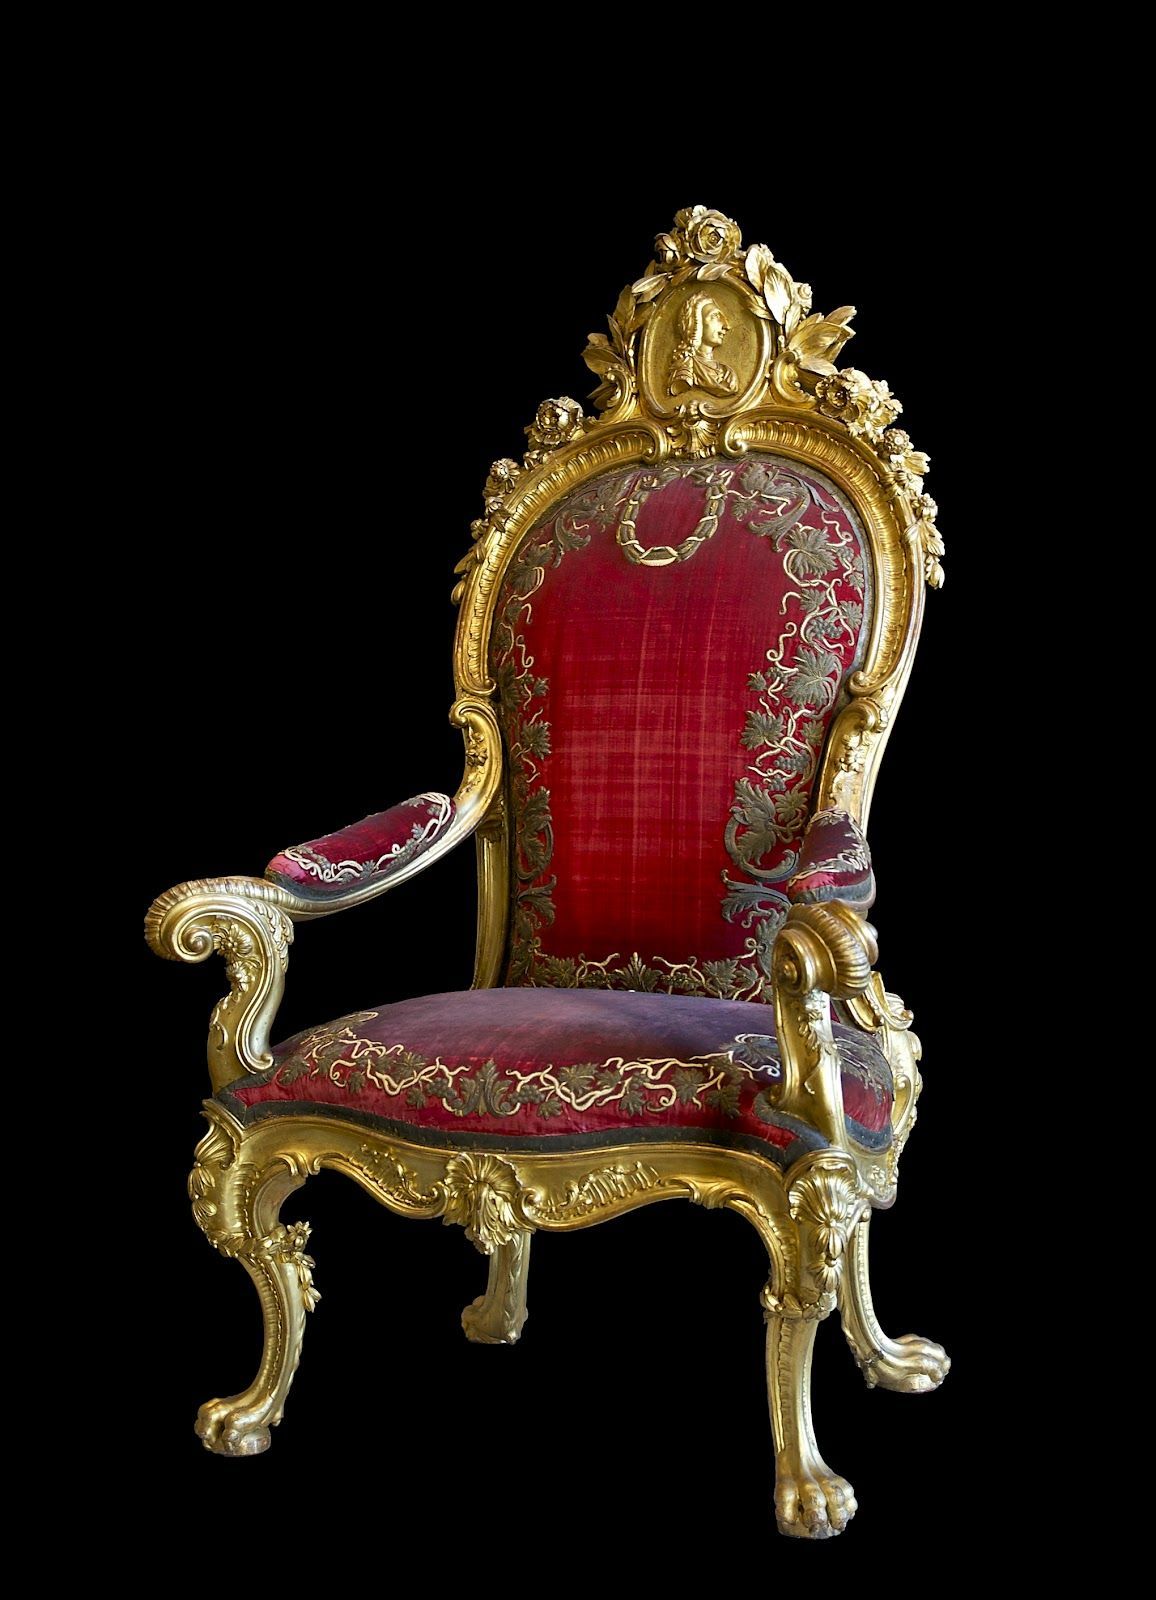 loveisspeed..: A King's Throne story with photo. Royal furniture, Victorian furniture, Chair